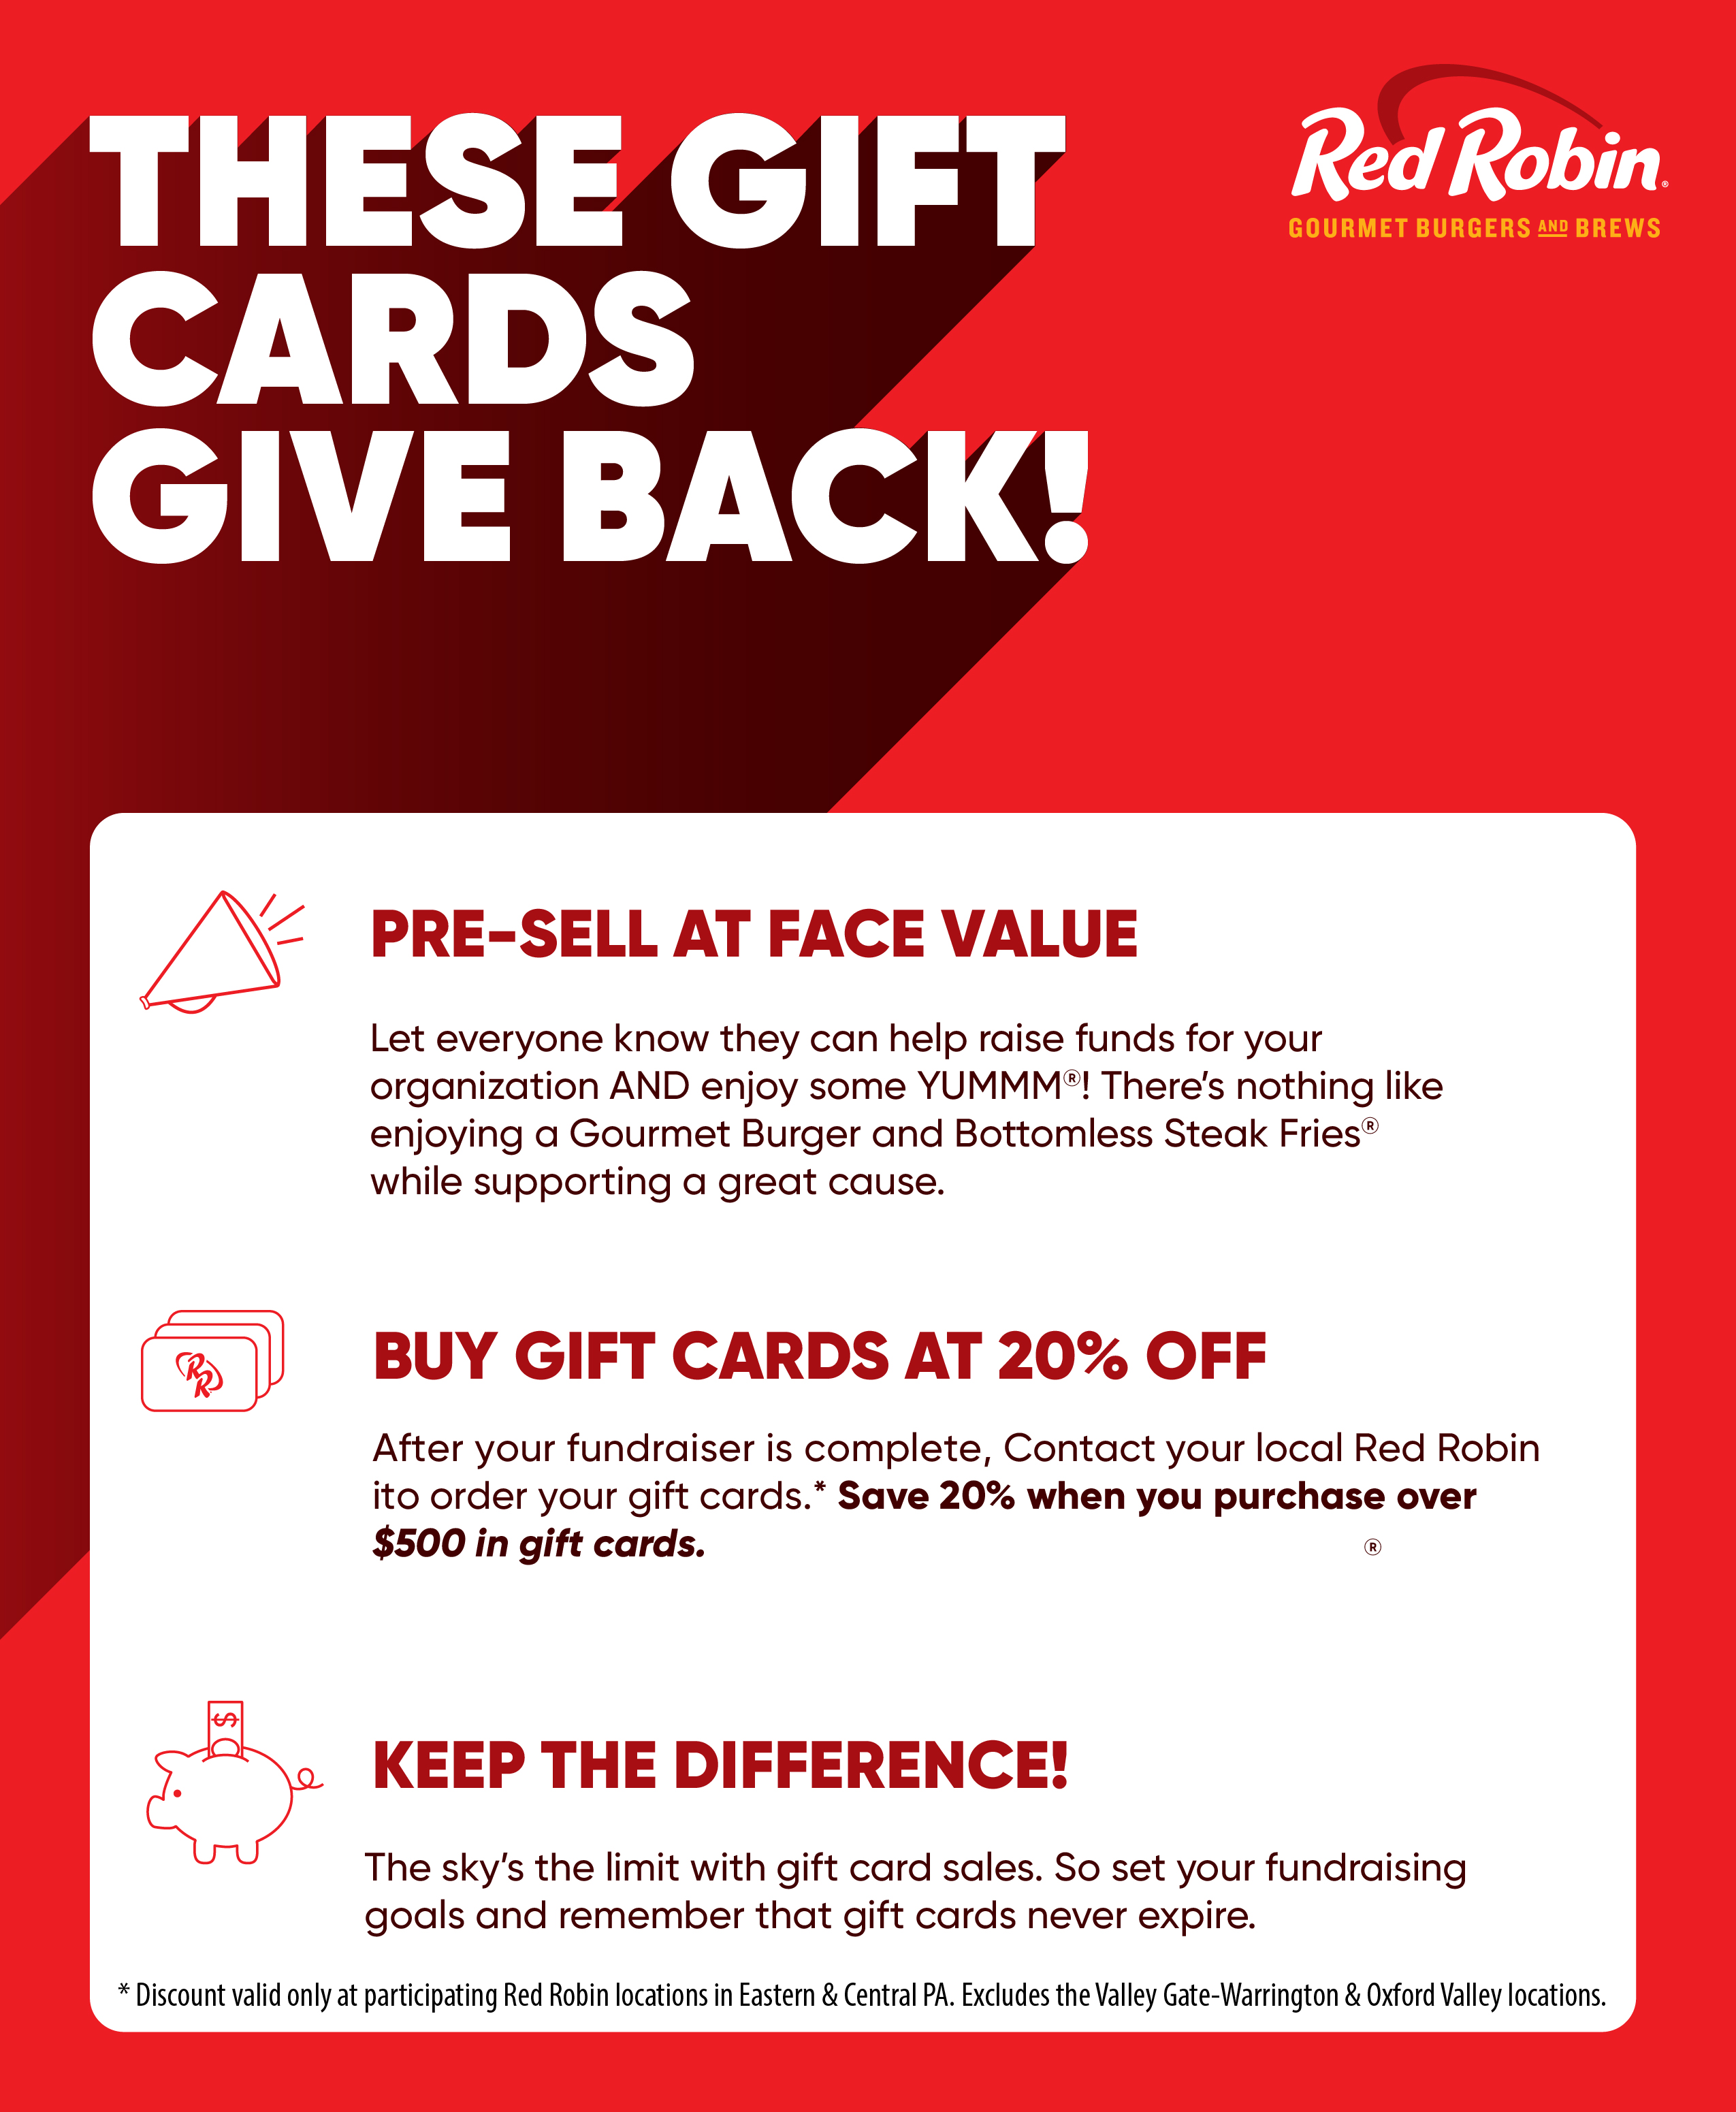 LVRG Red Robin Bulk Gift Card Fundraiser Program. Sell $500 in Red Robin Gift Cards, Receive 20% Back to Your Organization.